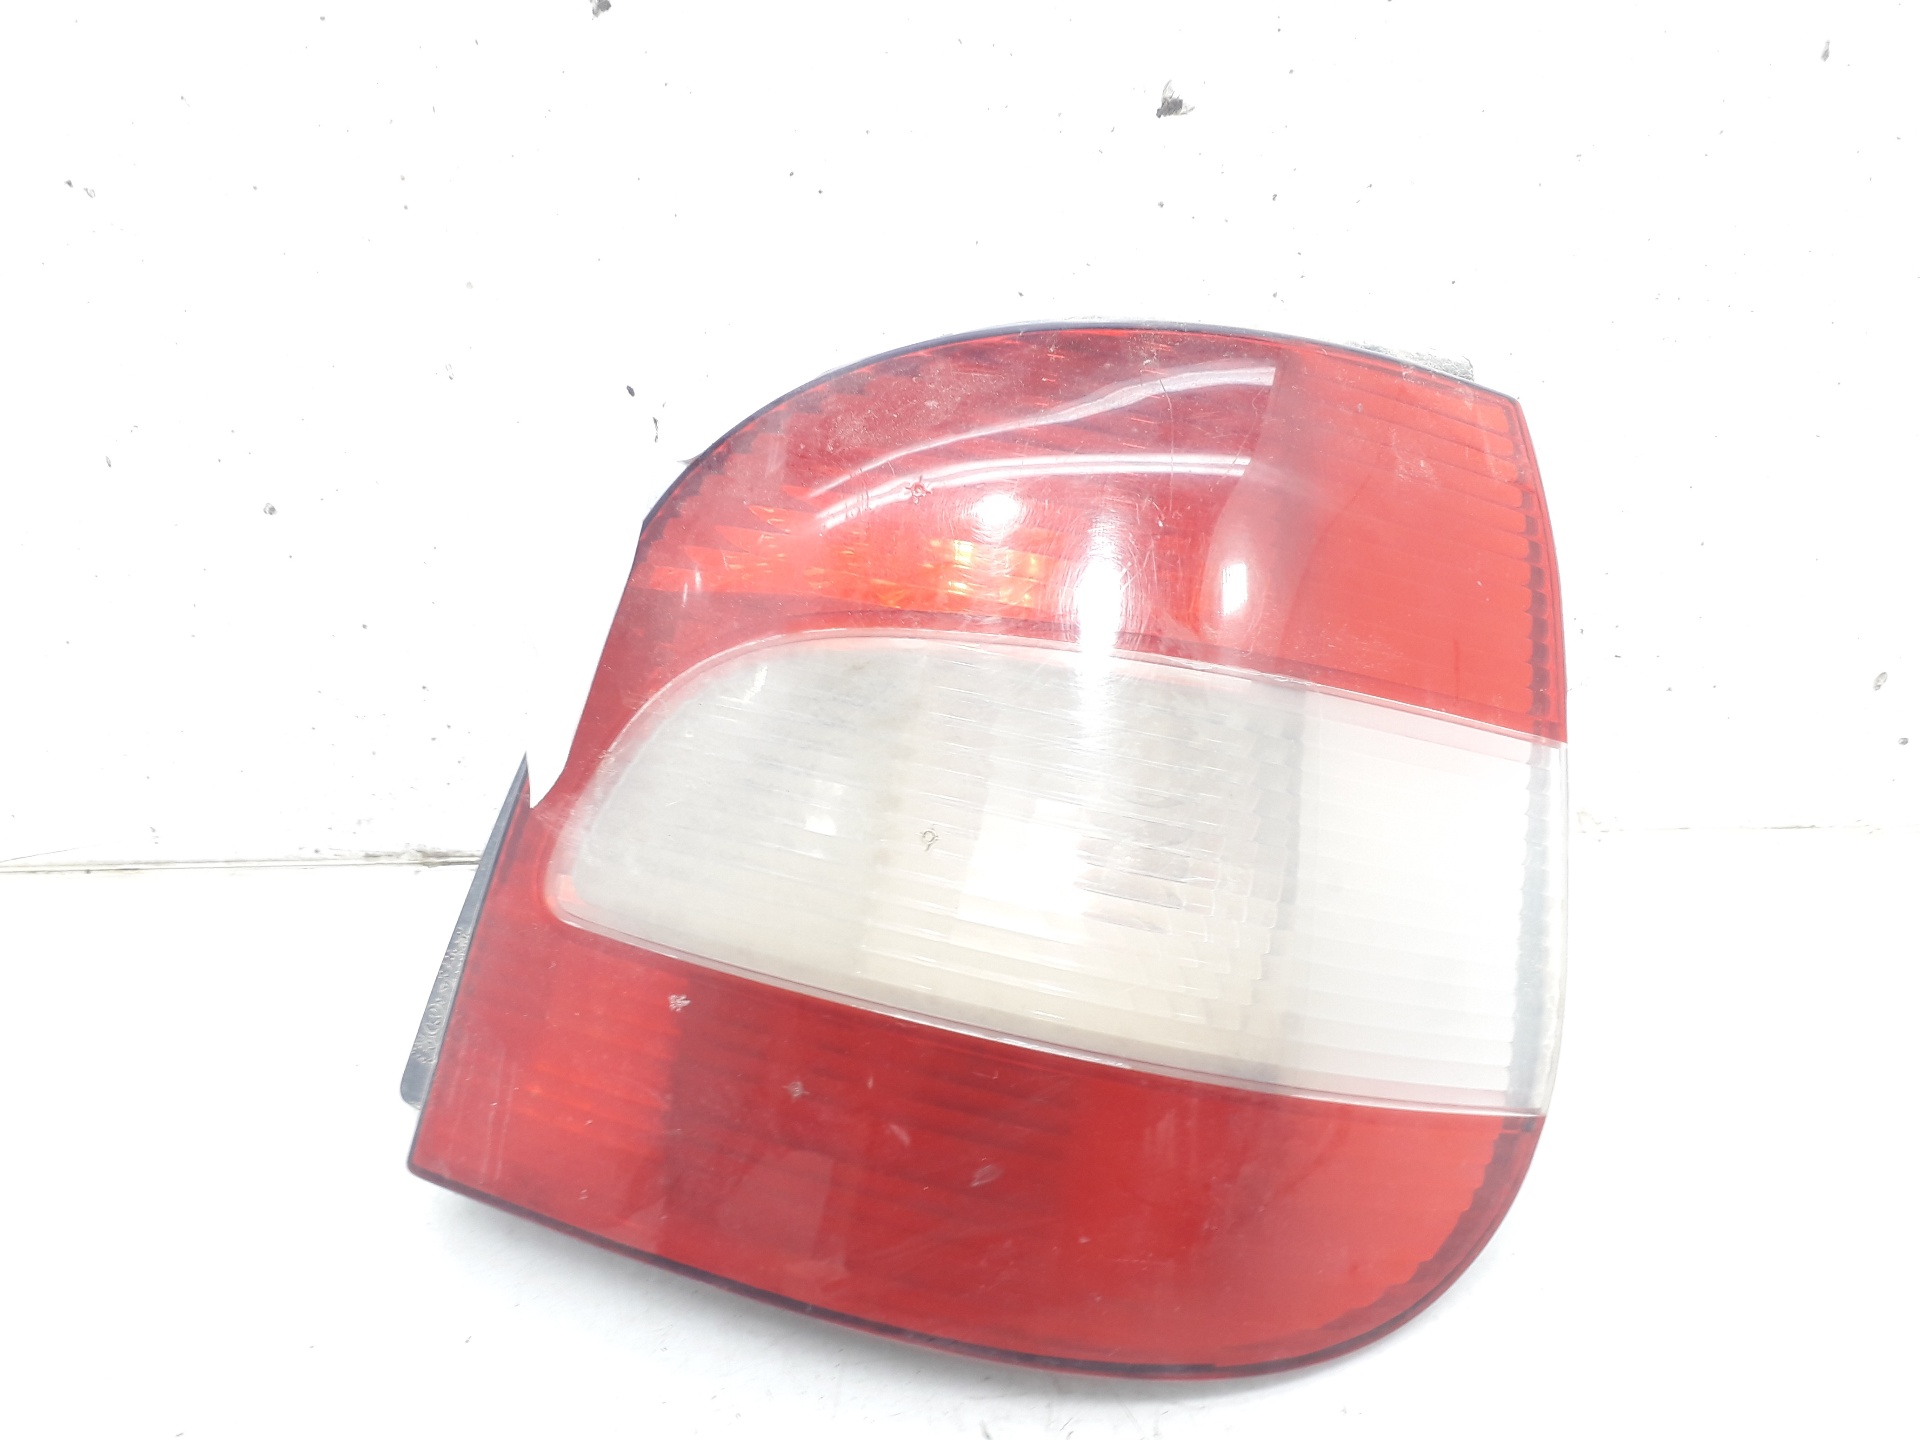 RENAULT Scenic 1 generation (1996-2003) Rear Right Taillight Lamp 7700430966 18800878